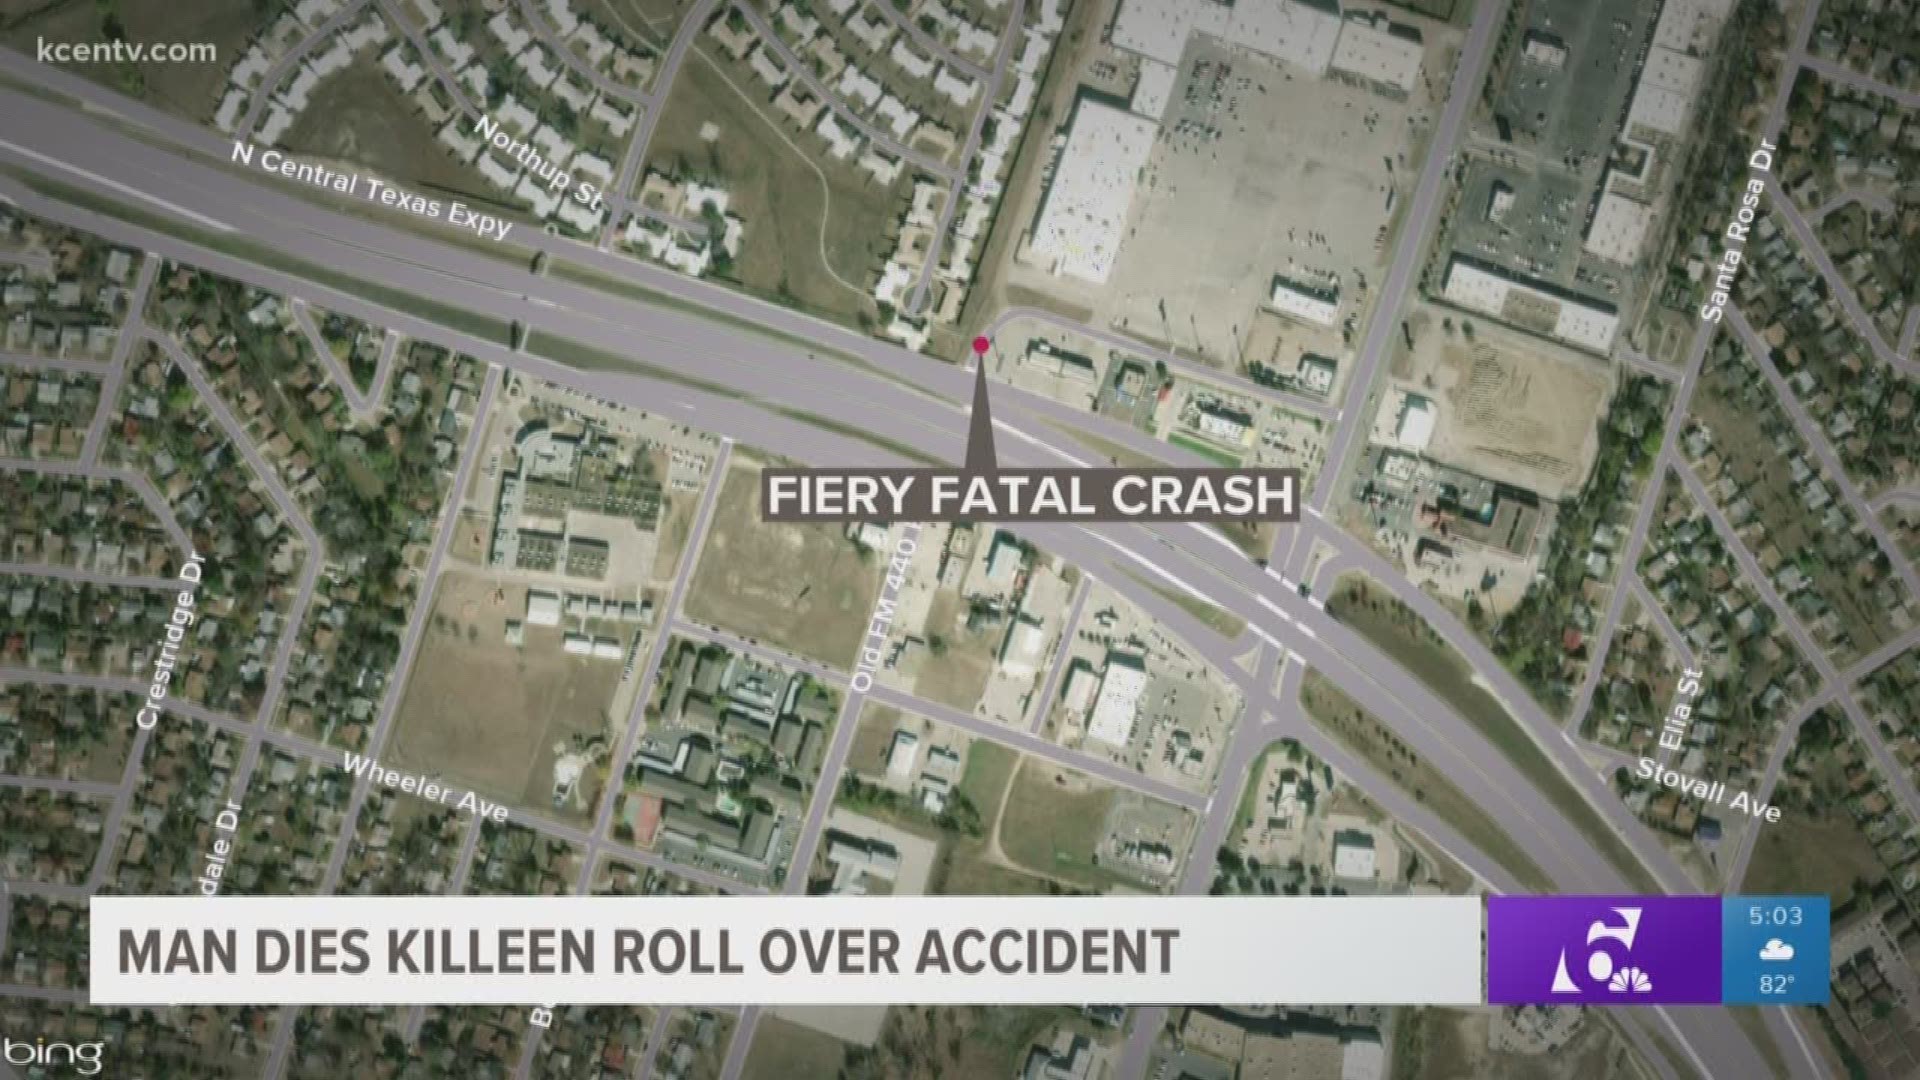 His car struck the median along IH-14 in Killeen and went up in flames, according to police.